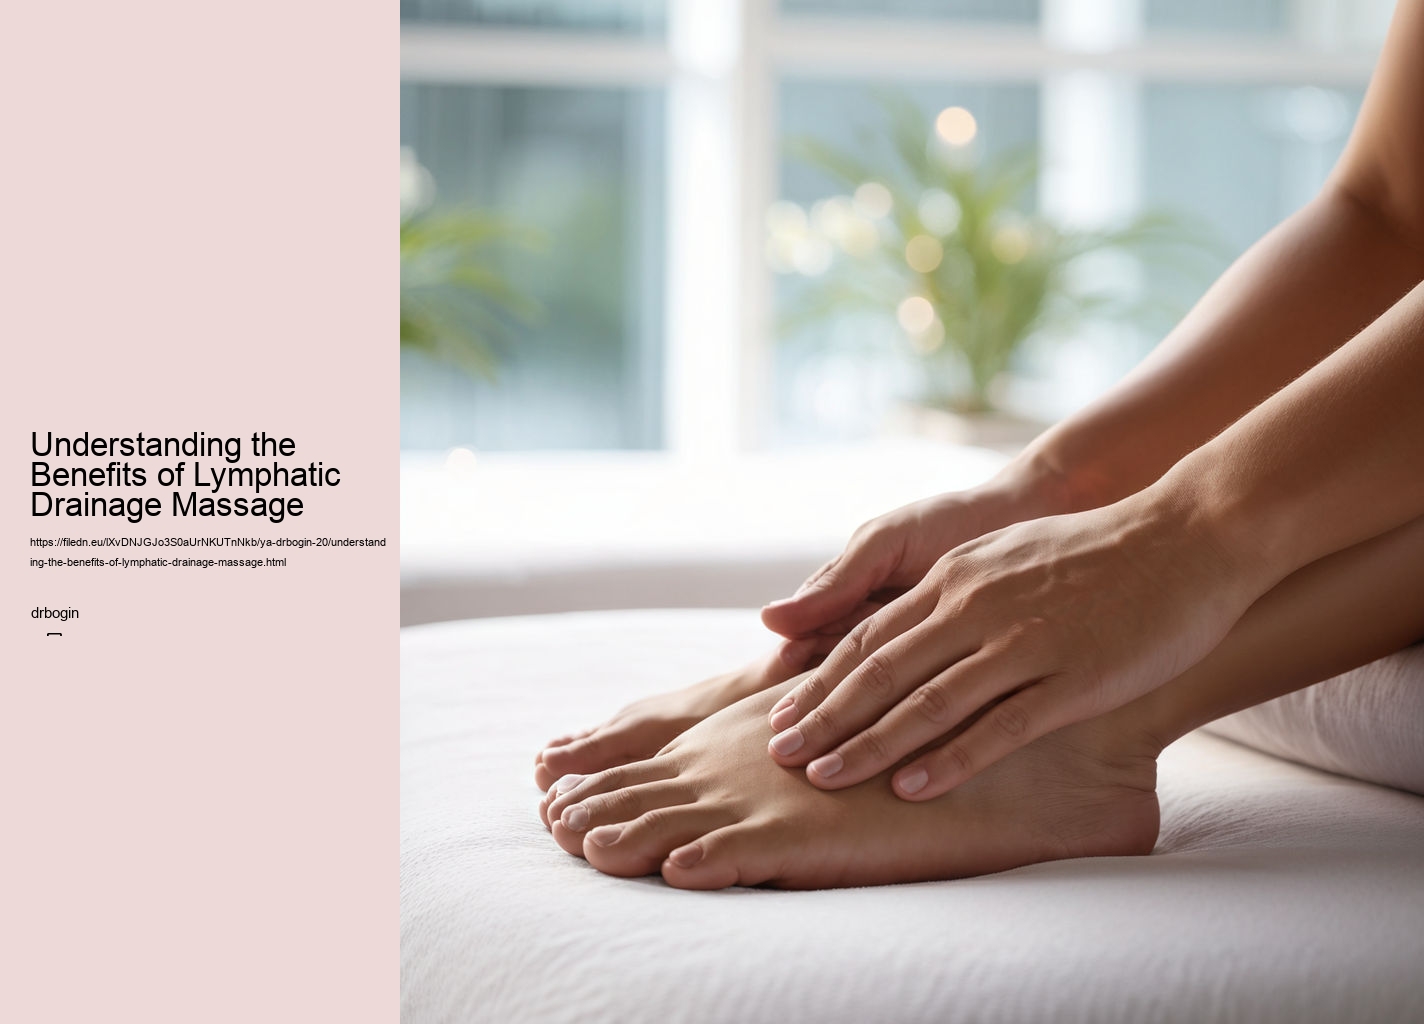 Understanding the Benefits of Lymphatic Drainage Massage